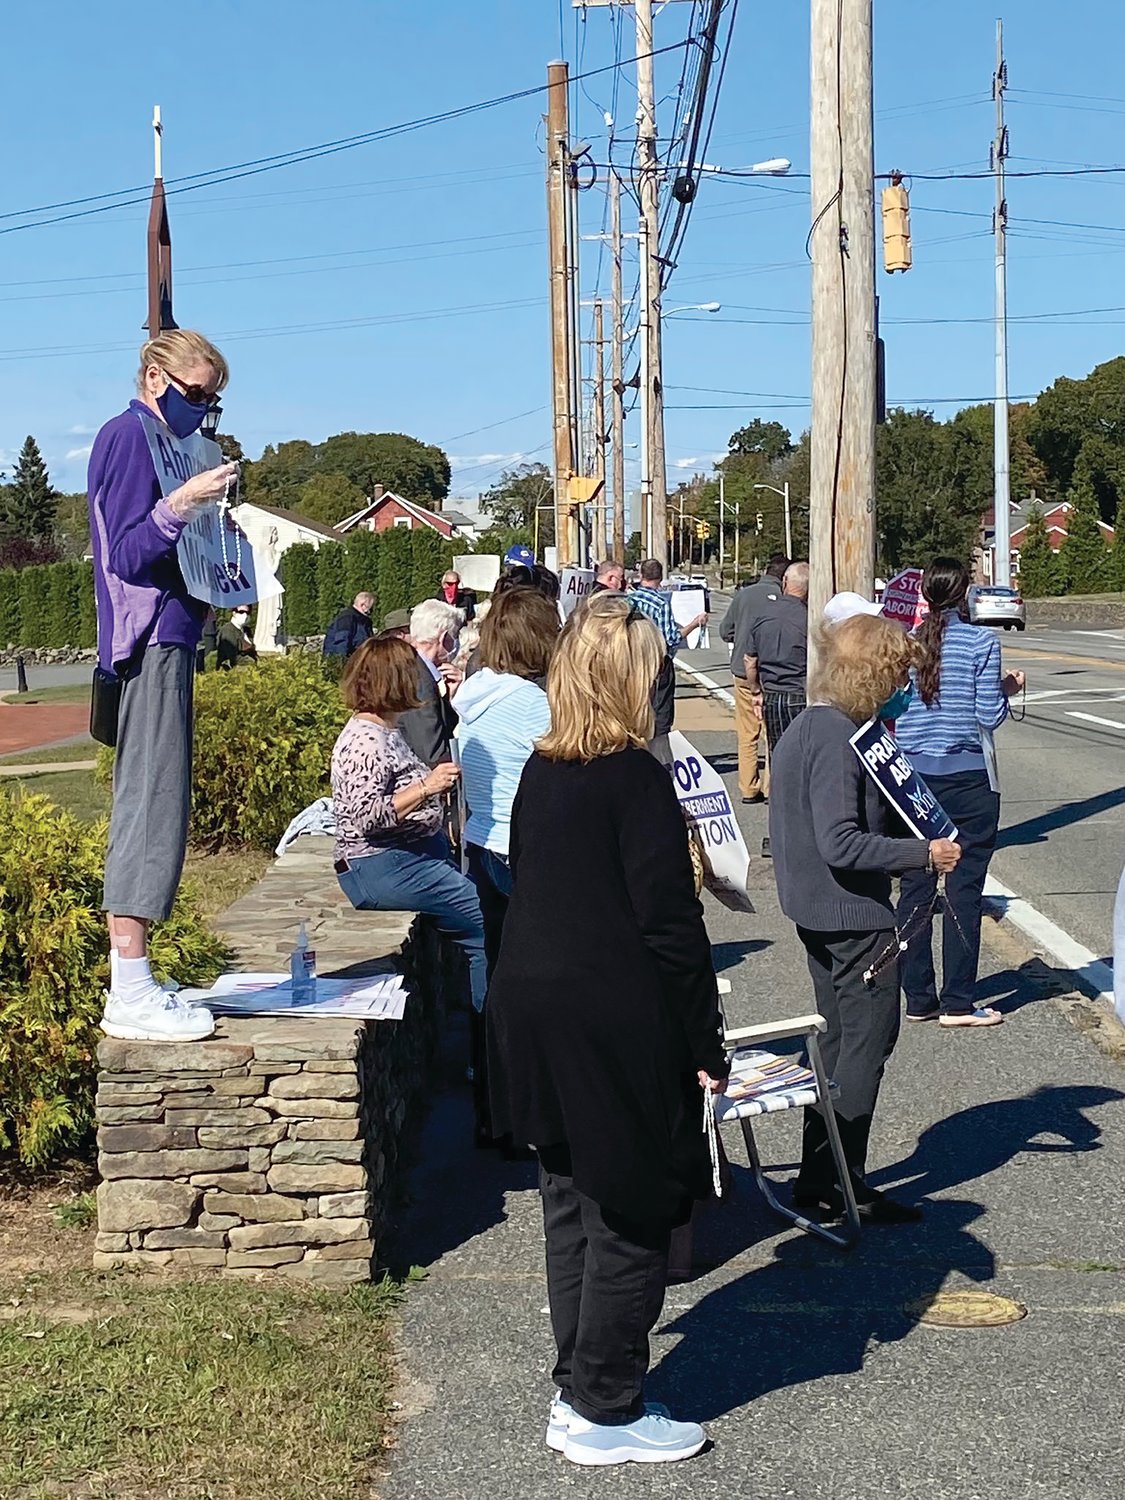 Rhode Islanders stand and pray together joining other pro-life individuals throughout the USA and Canada in honor of the millions of babies whose lives have been lost to abortion.